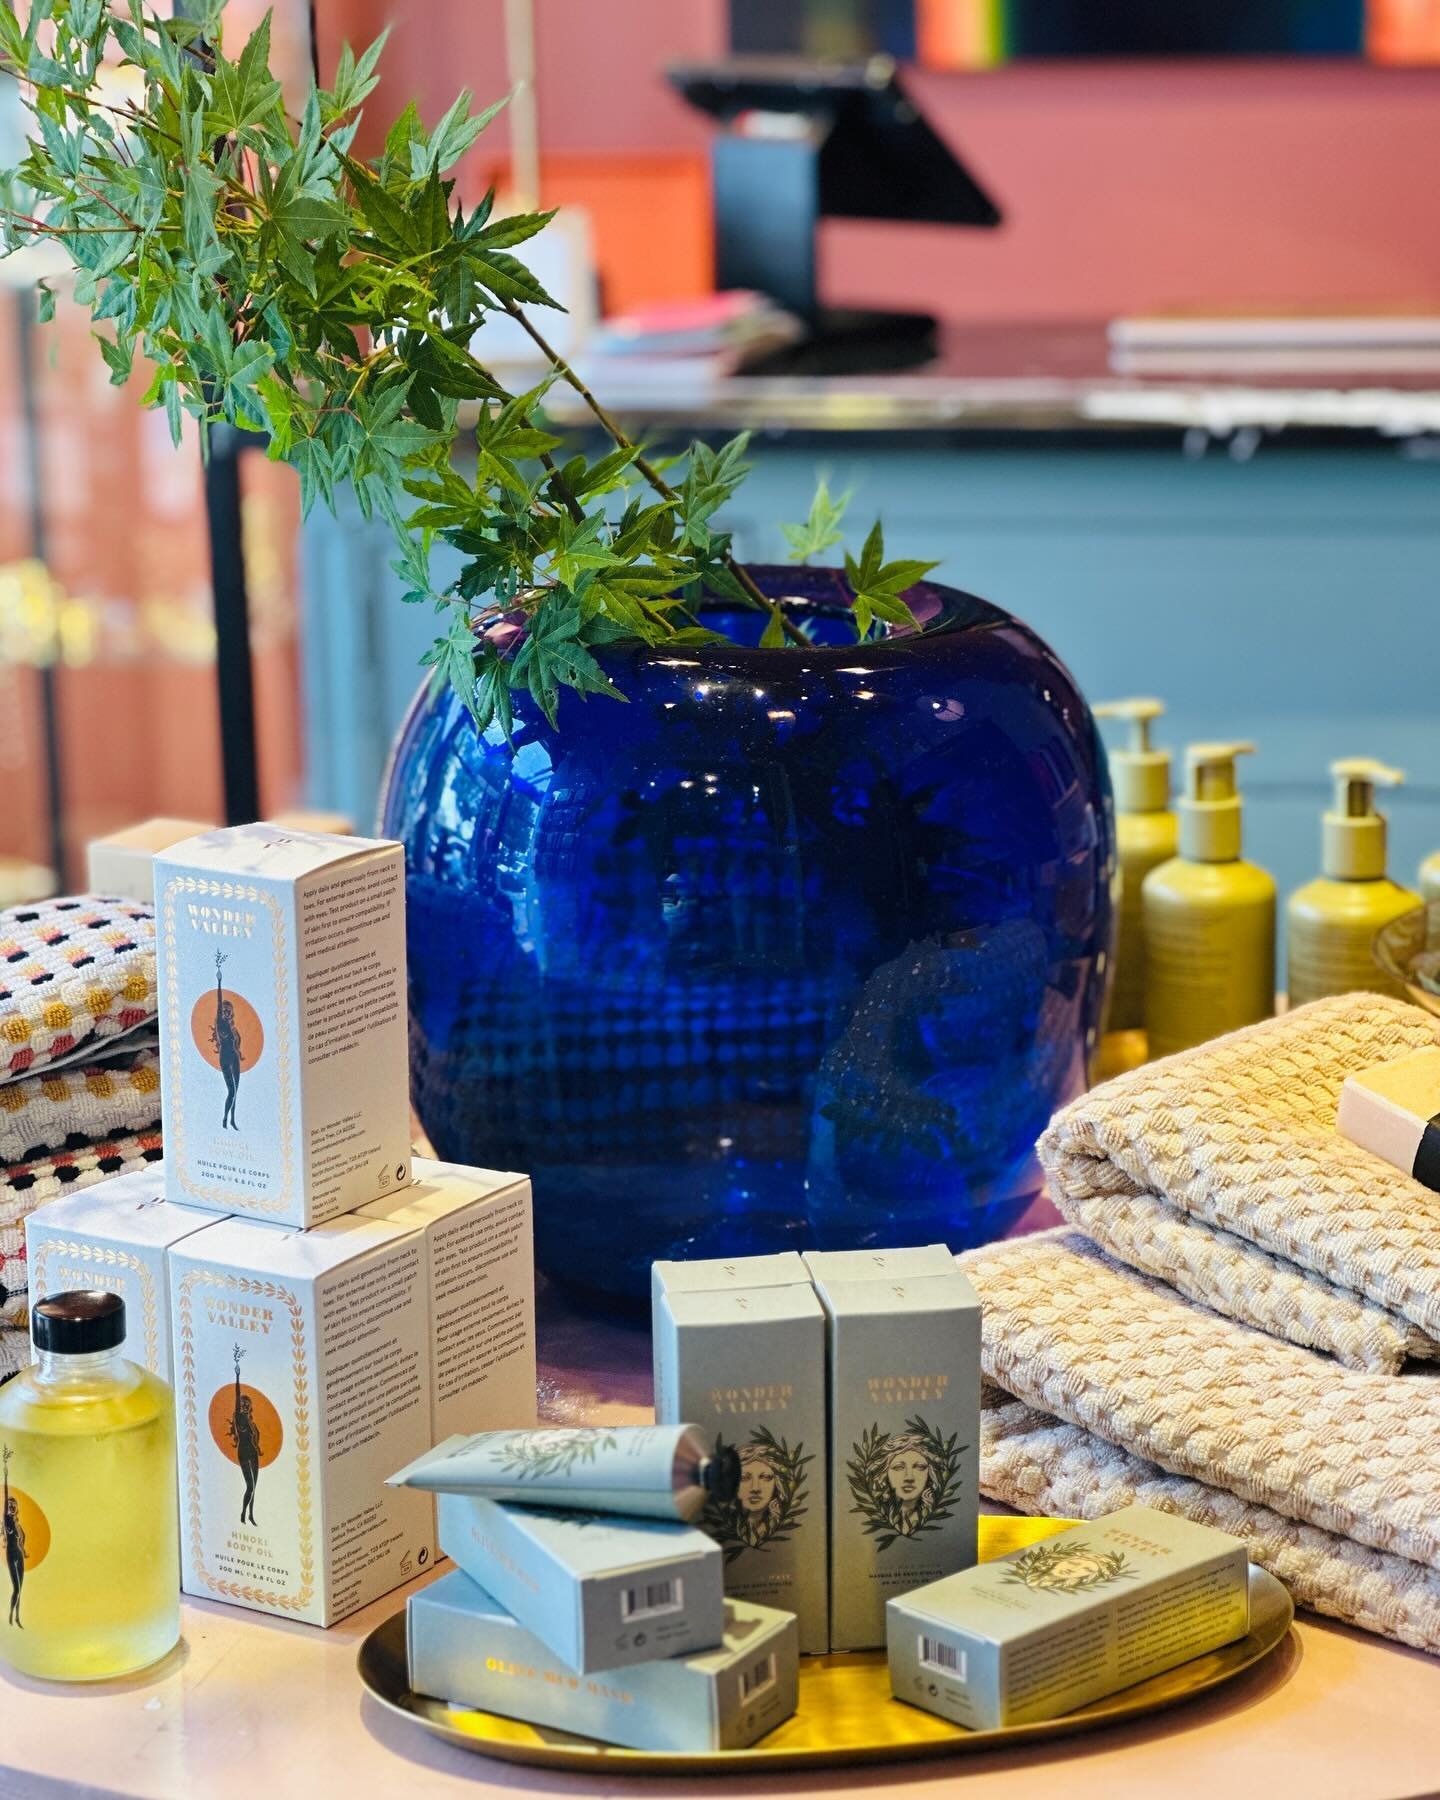 Loving this moment in the shop today. That killer cobalt blue vase highlights  @wondervalley products like a marriage made in self care heaven